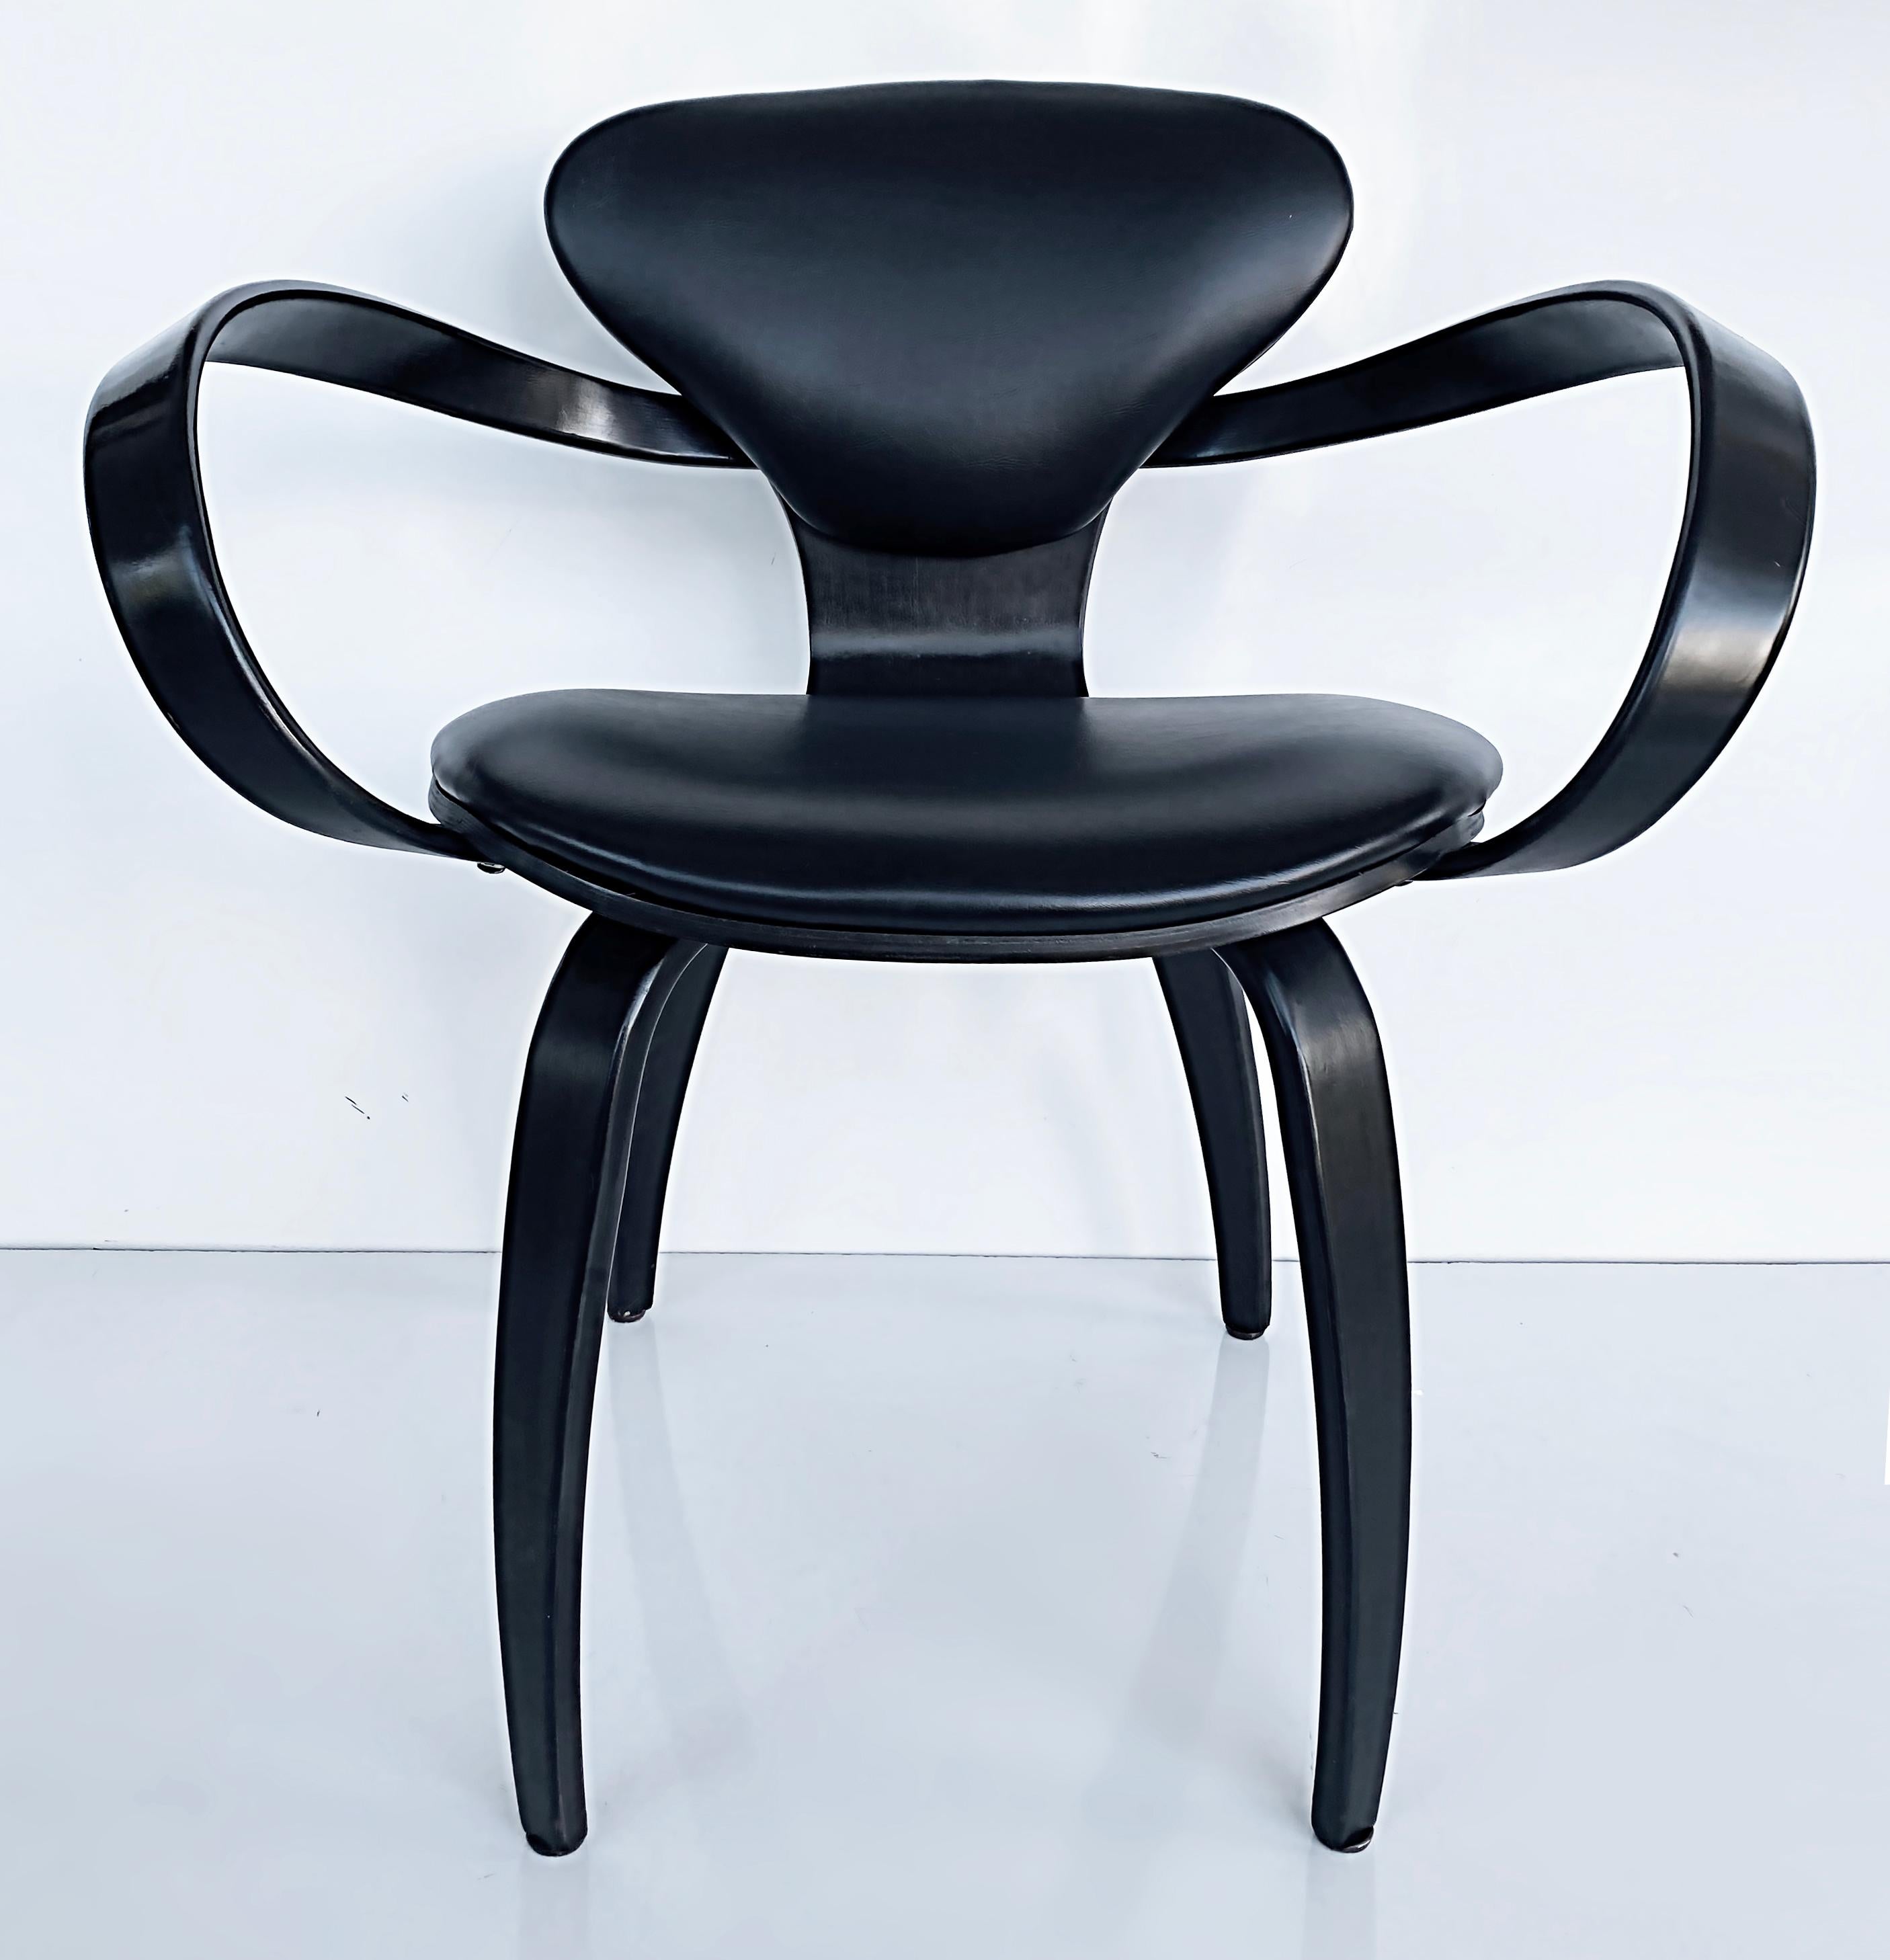 American Bentwood Pretzel Chairs Attributed to Norman Cherner for Plycraft